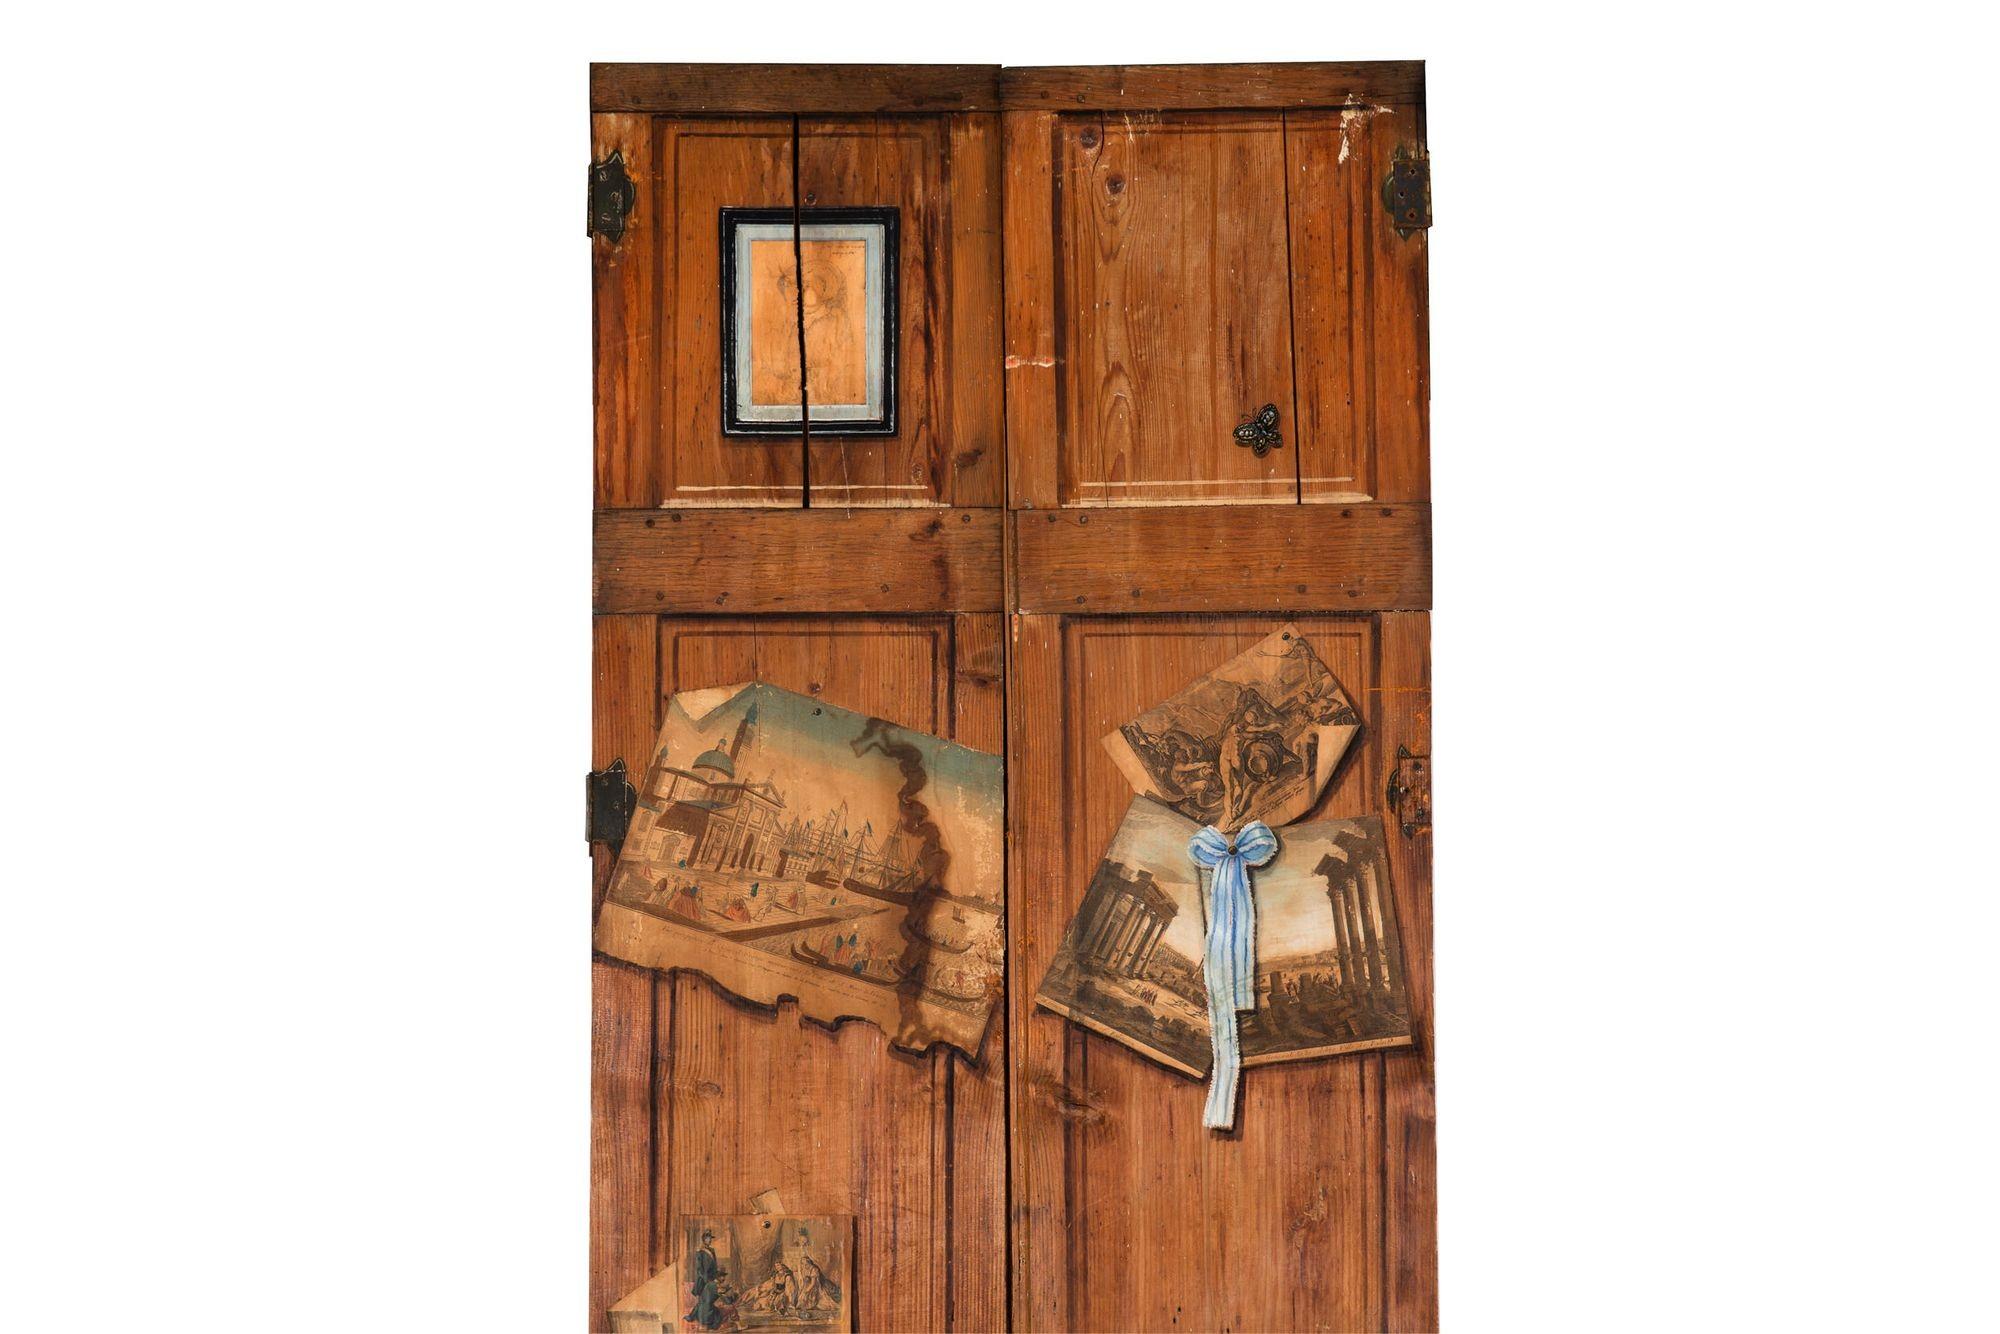 PAIR OF FRENCH SCRUBBED AND WORN PINE TENON-MORTISED DOORS
With decoupage & trompe l'oeil decoration throughout  19th century
Item # 306UMJ21P 

These super fun and incredibly worn French scrubbed pine doors are austere in construction with full